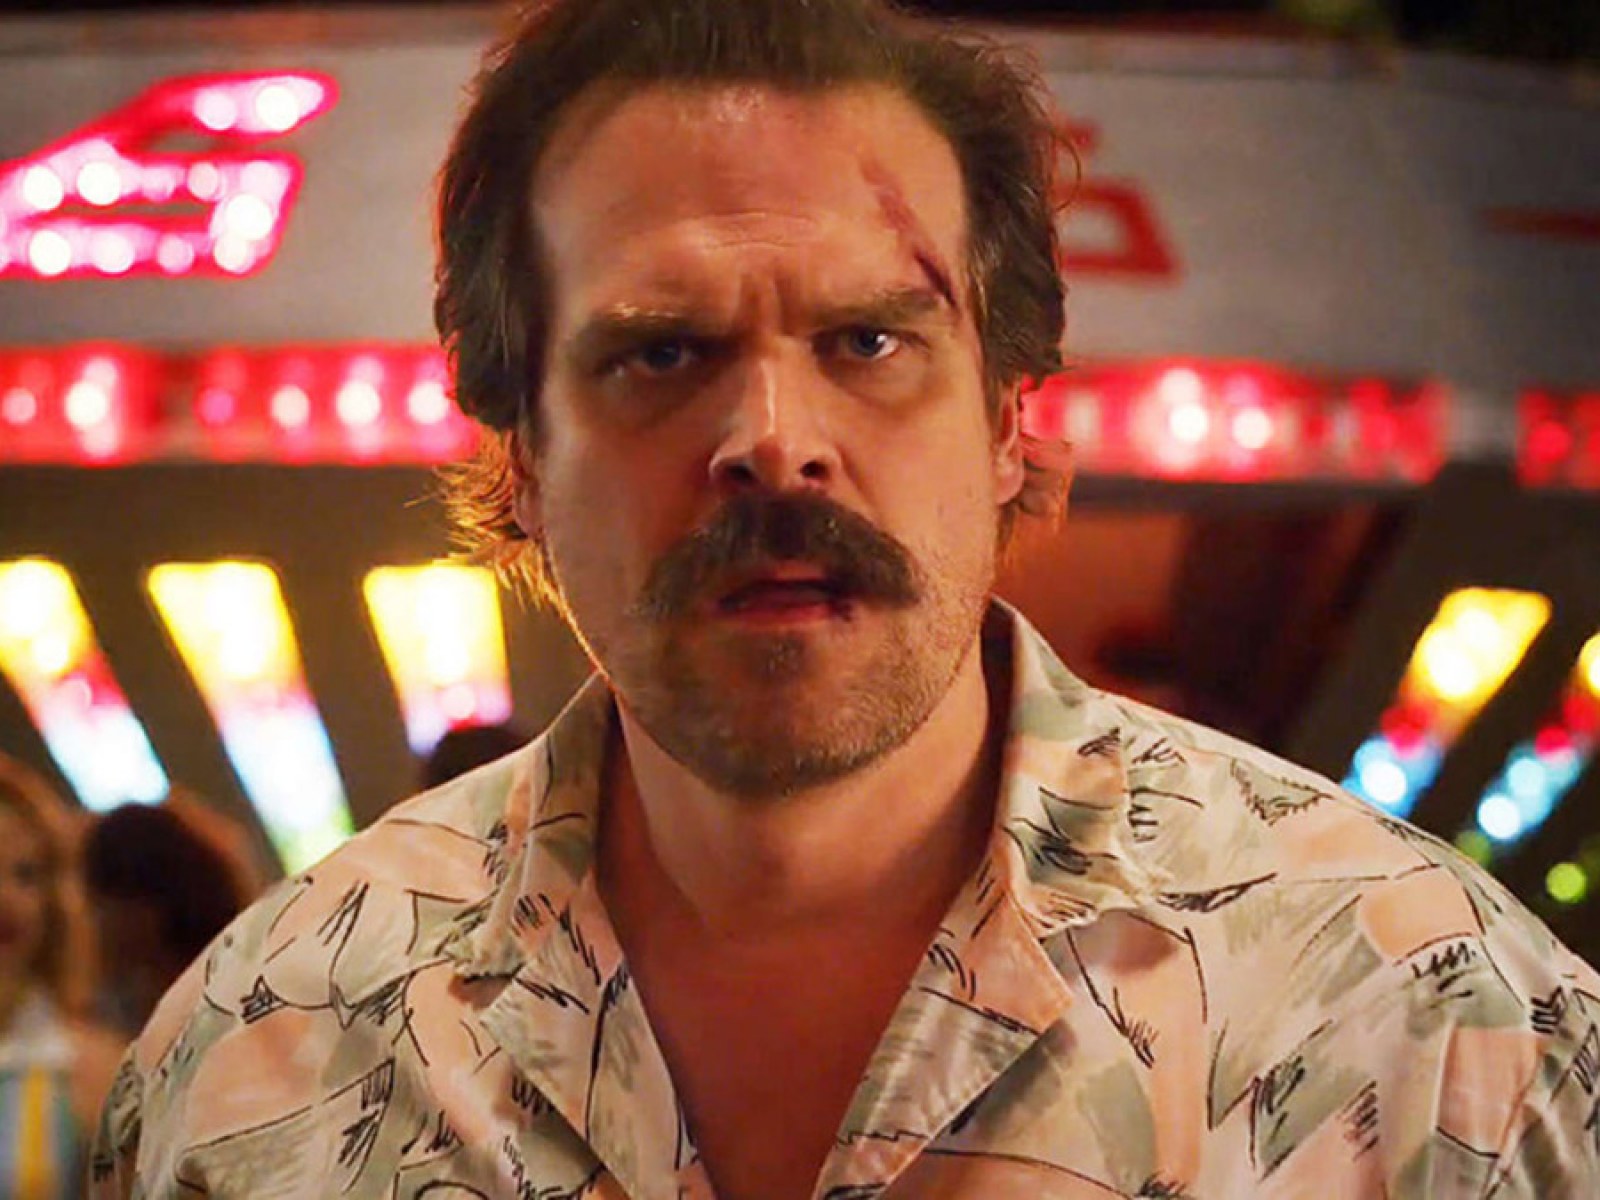 Stranger Things Season 4 Hopper Villain Theory - David Harbour's Character  Is Alive, But He Might Be a Villain